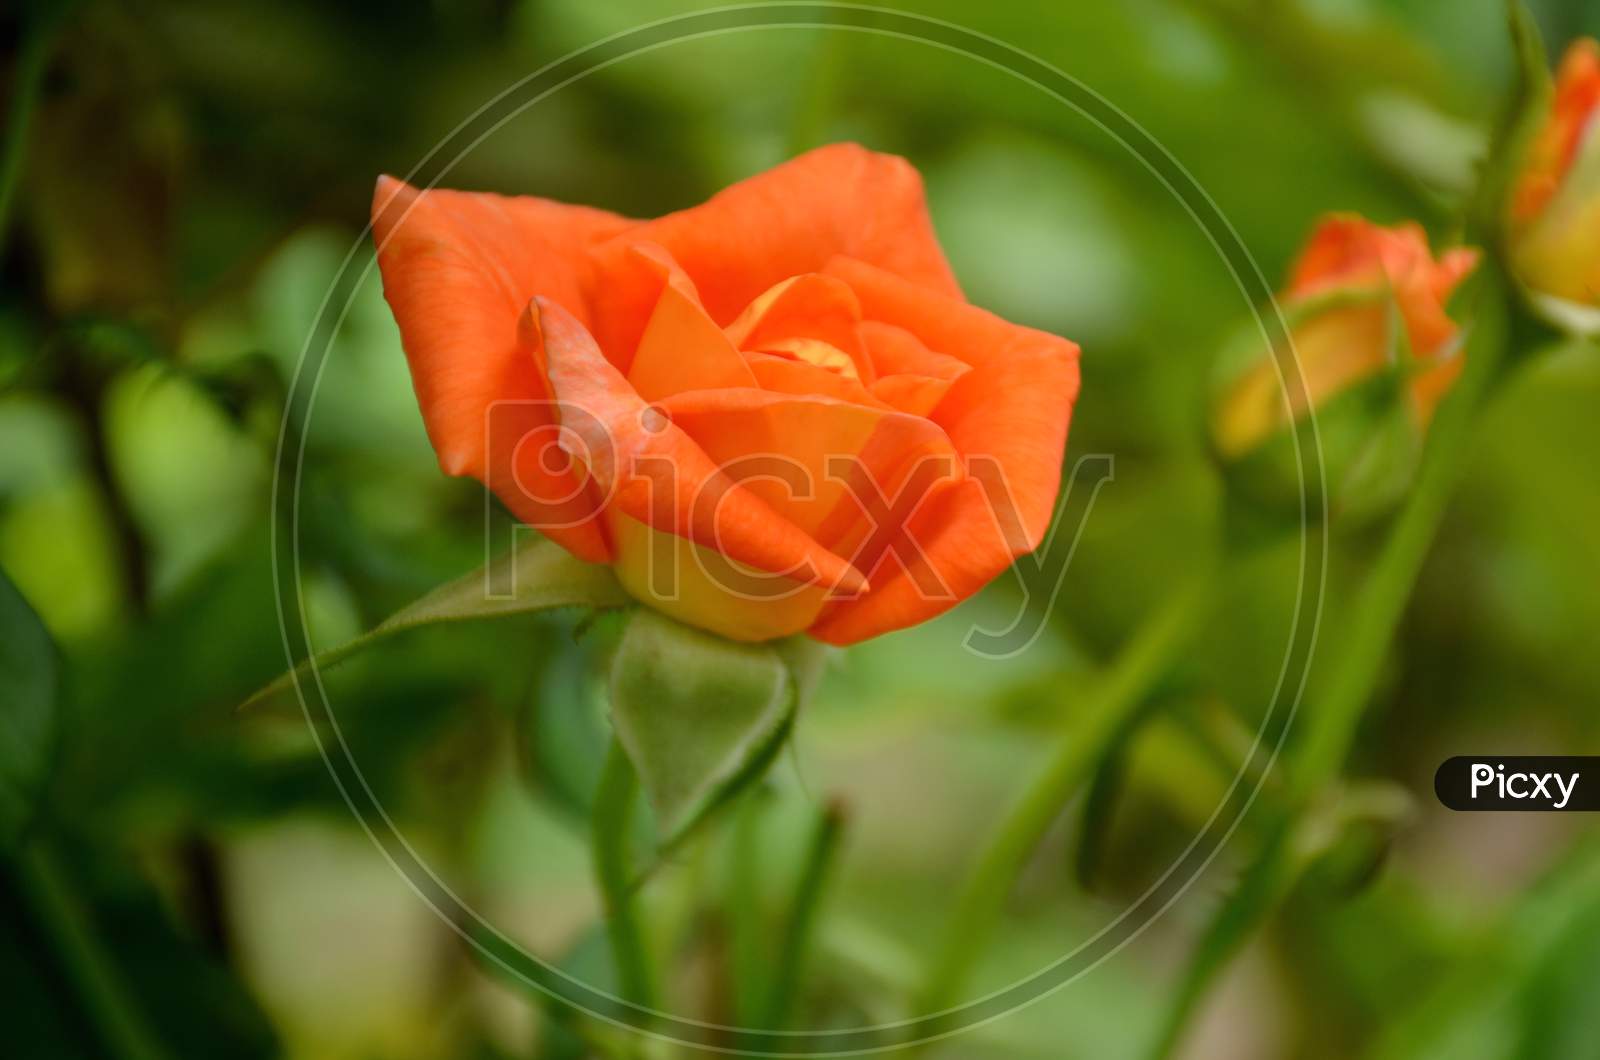 The Orange Color Rose Flower With Green Leaves And Branch